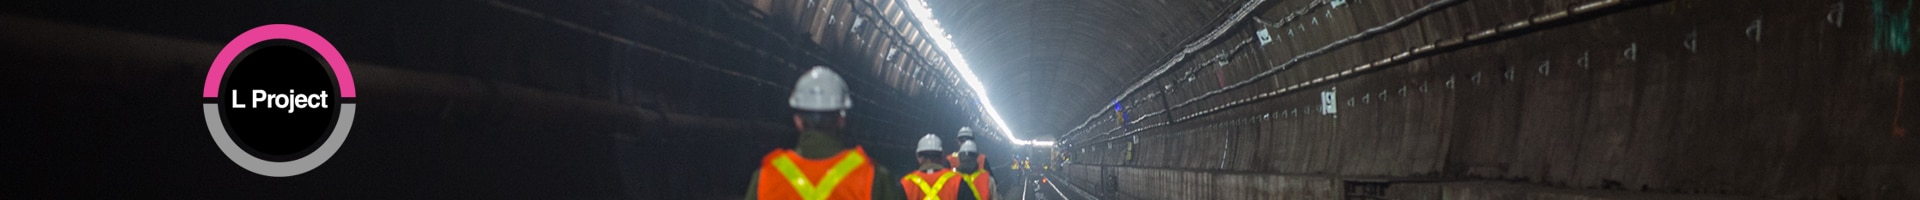 A line of workers in vests and helmets walking down a tunnel. There are two lines, one pink and one grey, that create a circle. Insider the circle is the letters L PROJECT